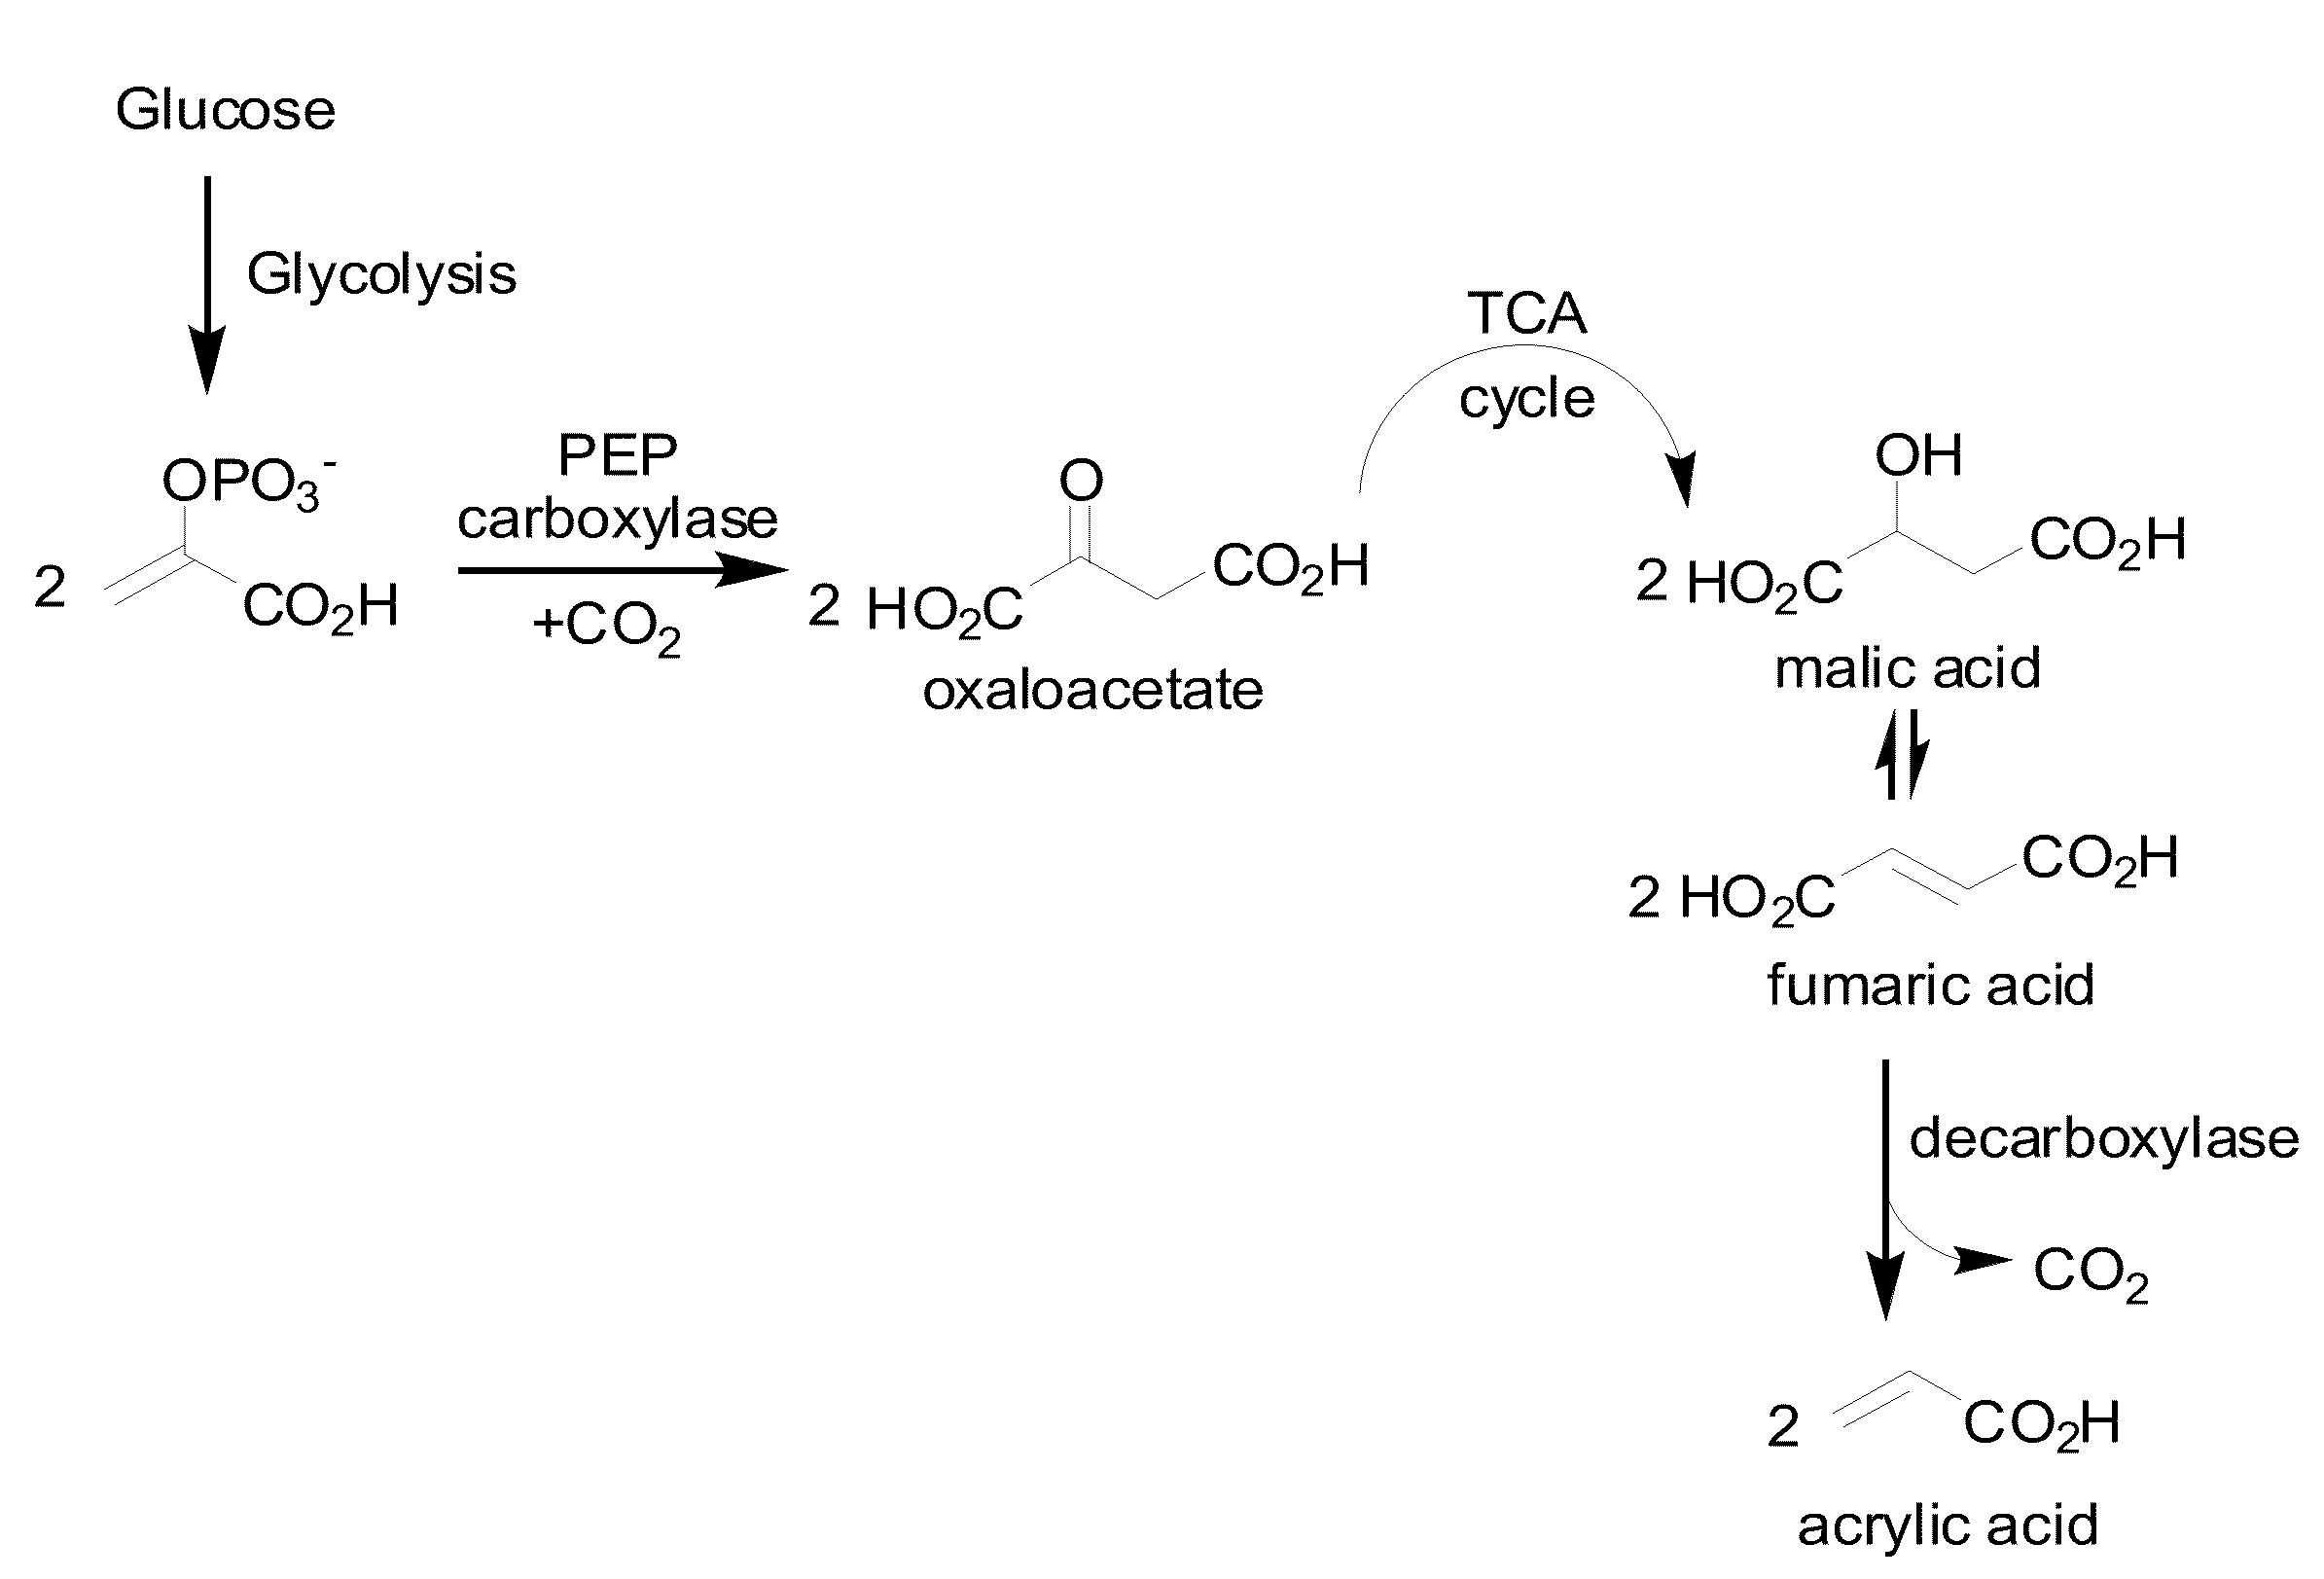 Microorganisms and methods for the biosynthesis of fumarate, malate, and acrylate